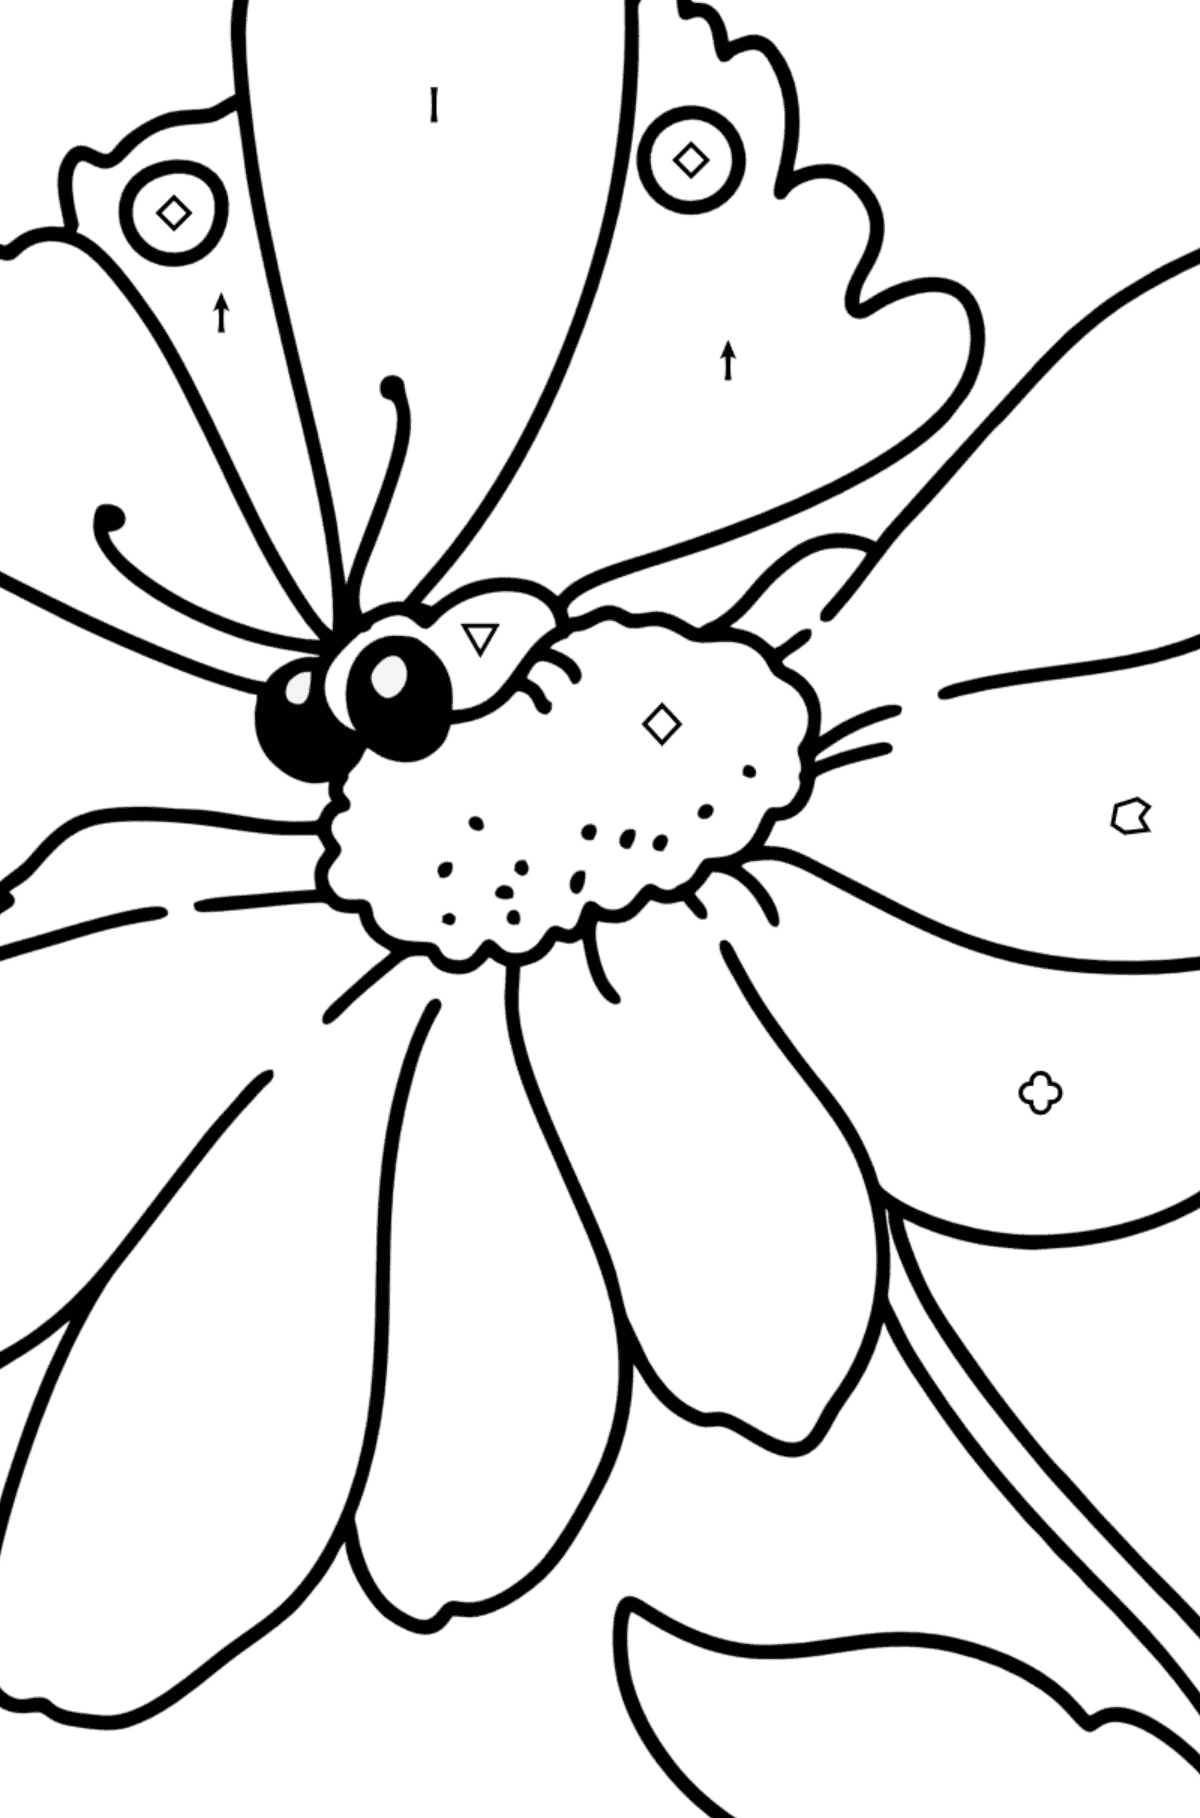 Summer Coloring page - Flowers and Butterfly - Coloring by Symbols and Geometric Shapes for Kids